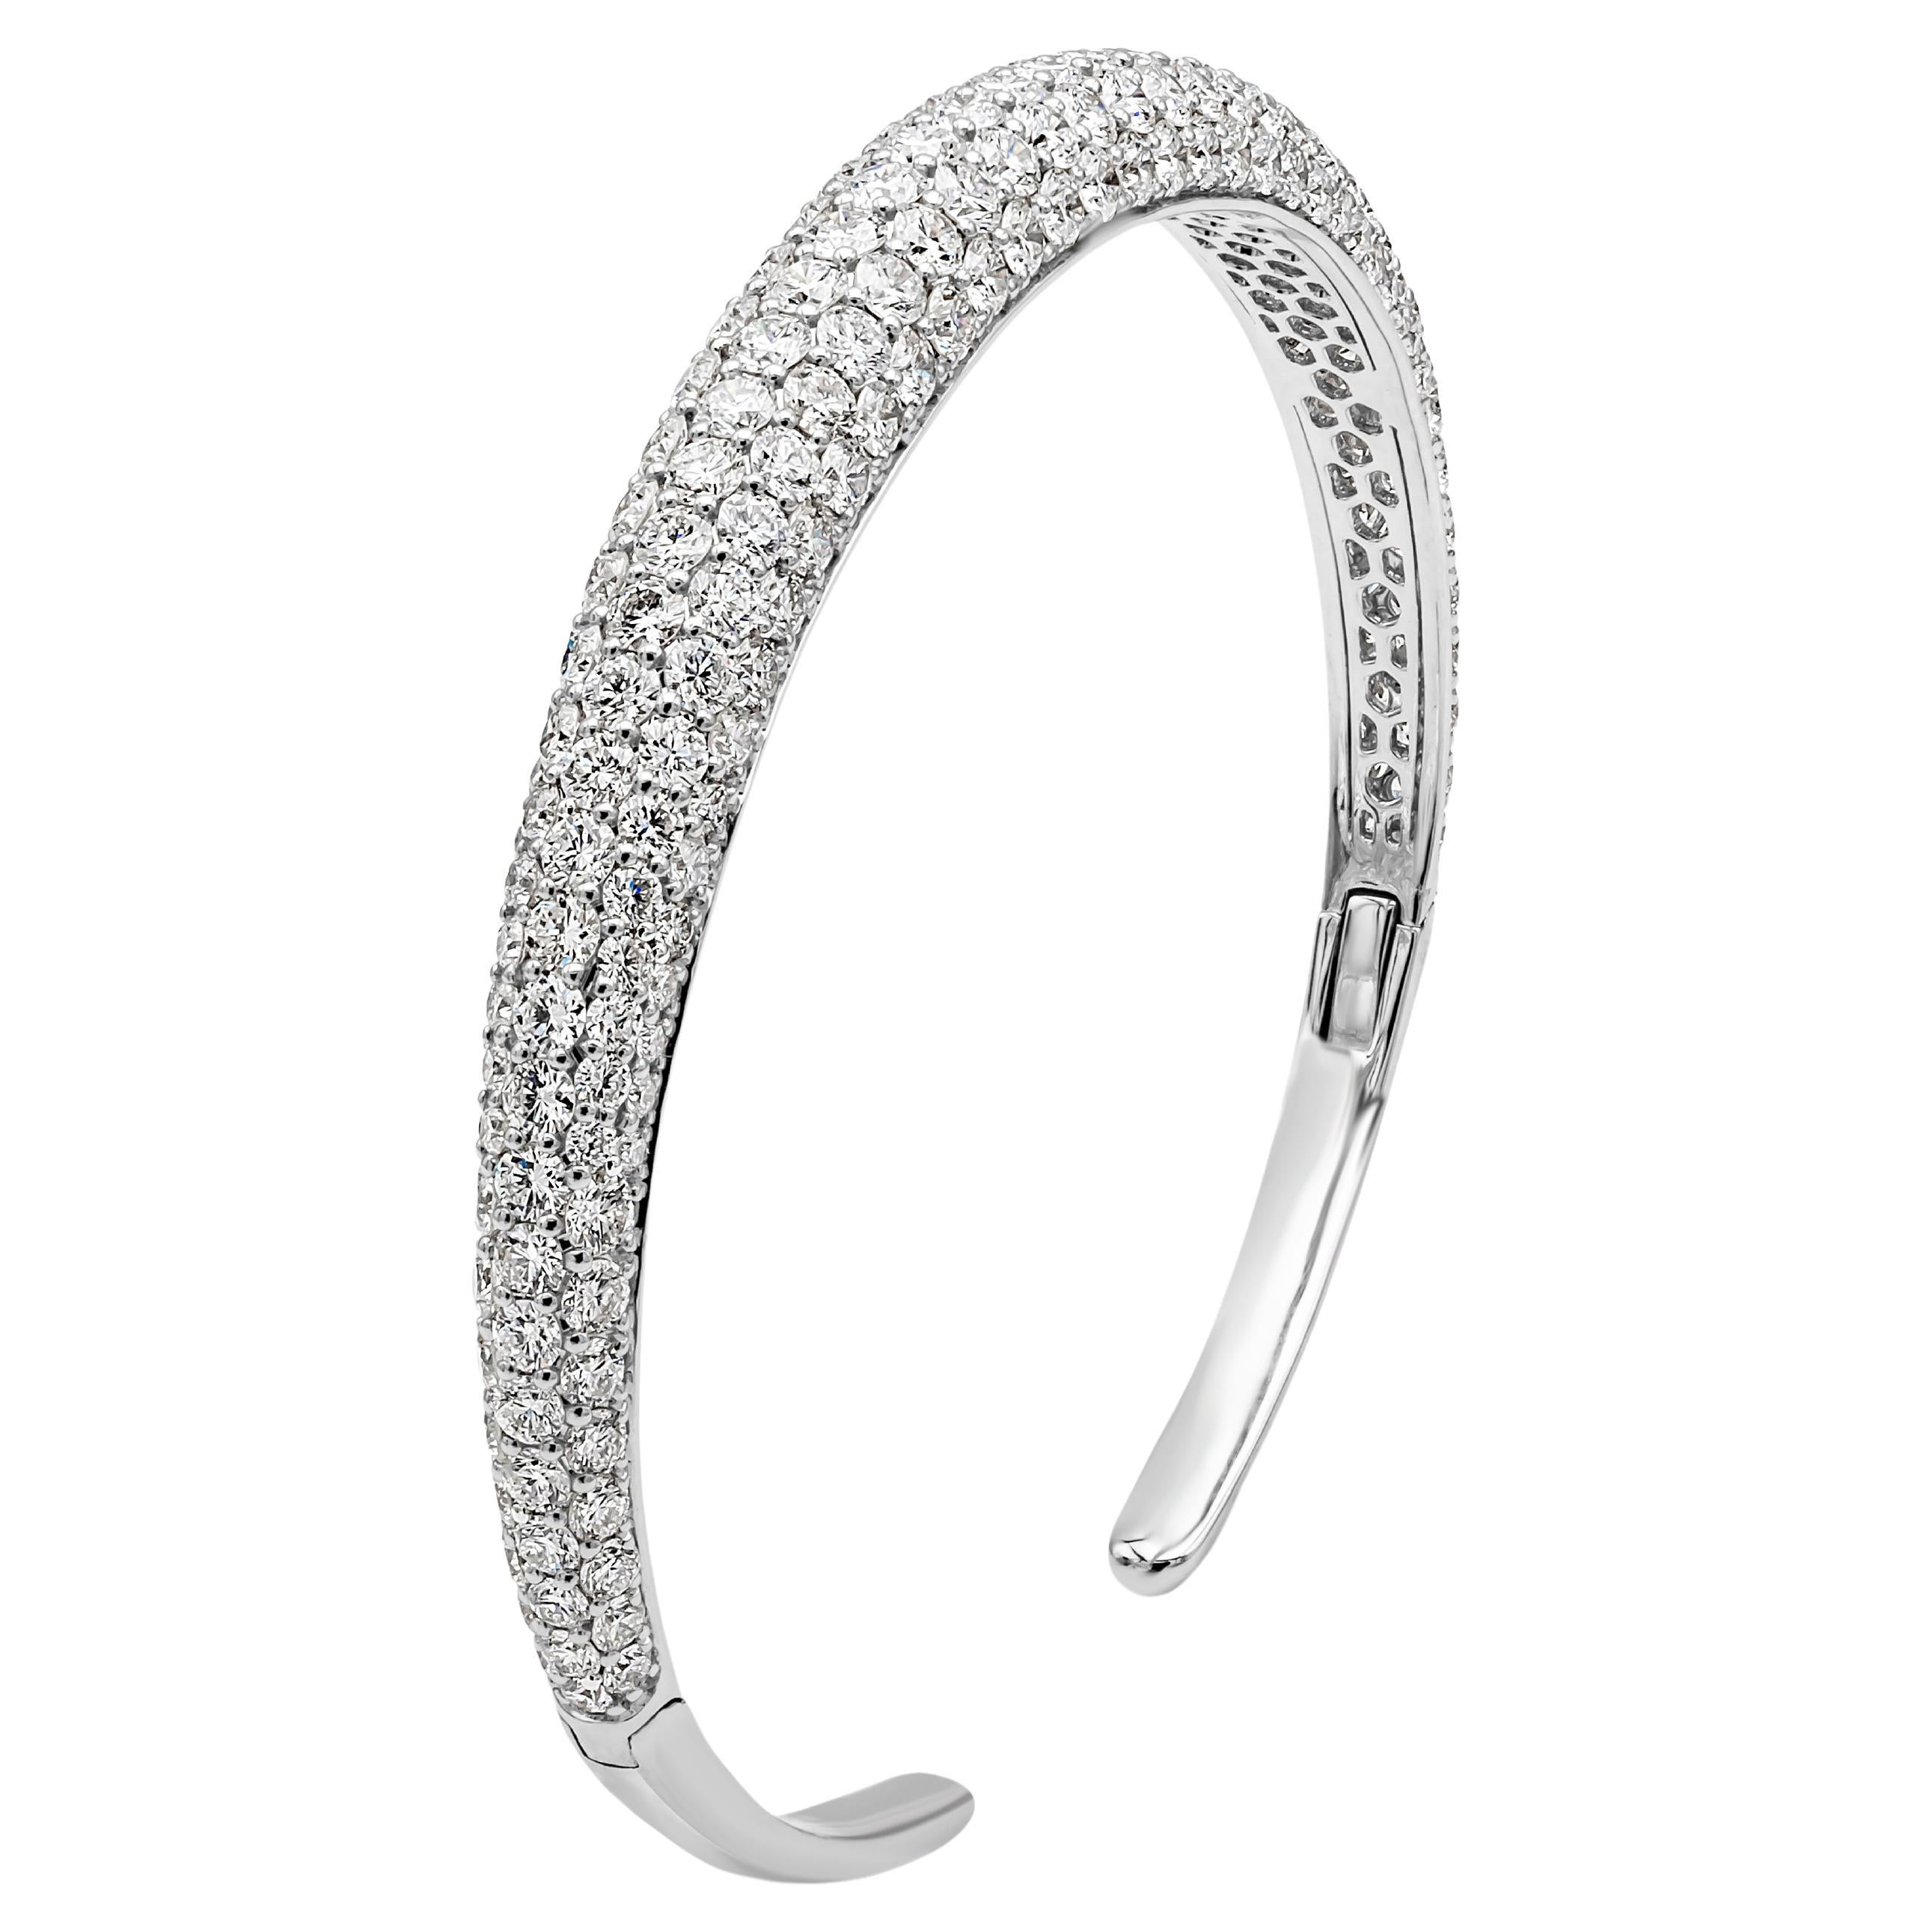 A beautiful and stunning bangle bracelet, showcasing 209 round brilliant cut diamonds weighing 8.05 carats total with F-G color and VS-SI clarity. Set on a shared-prong micropavé dome finely made of 18K white gold. This cuff bracelet is 6.75 inches